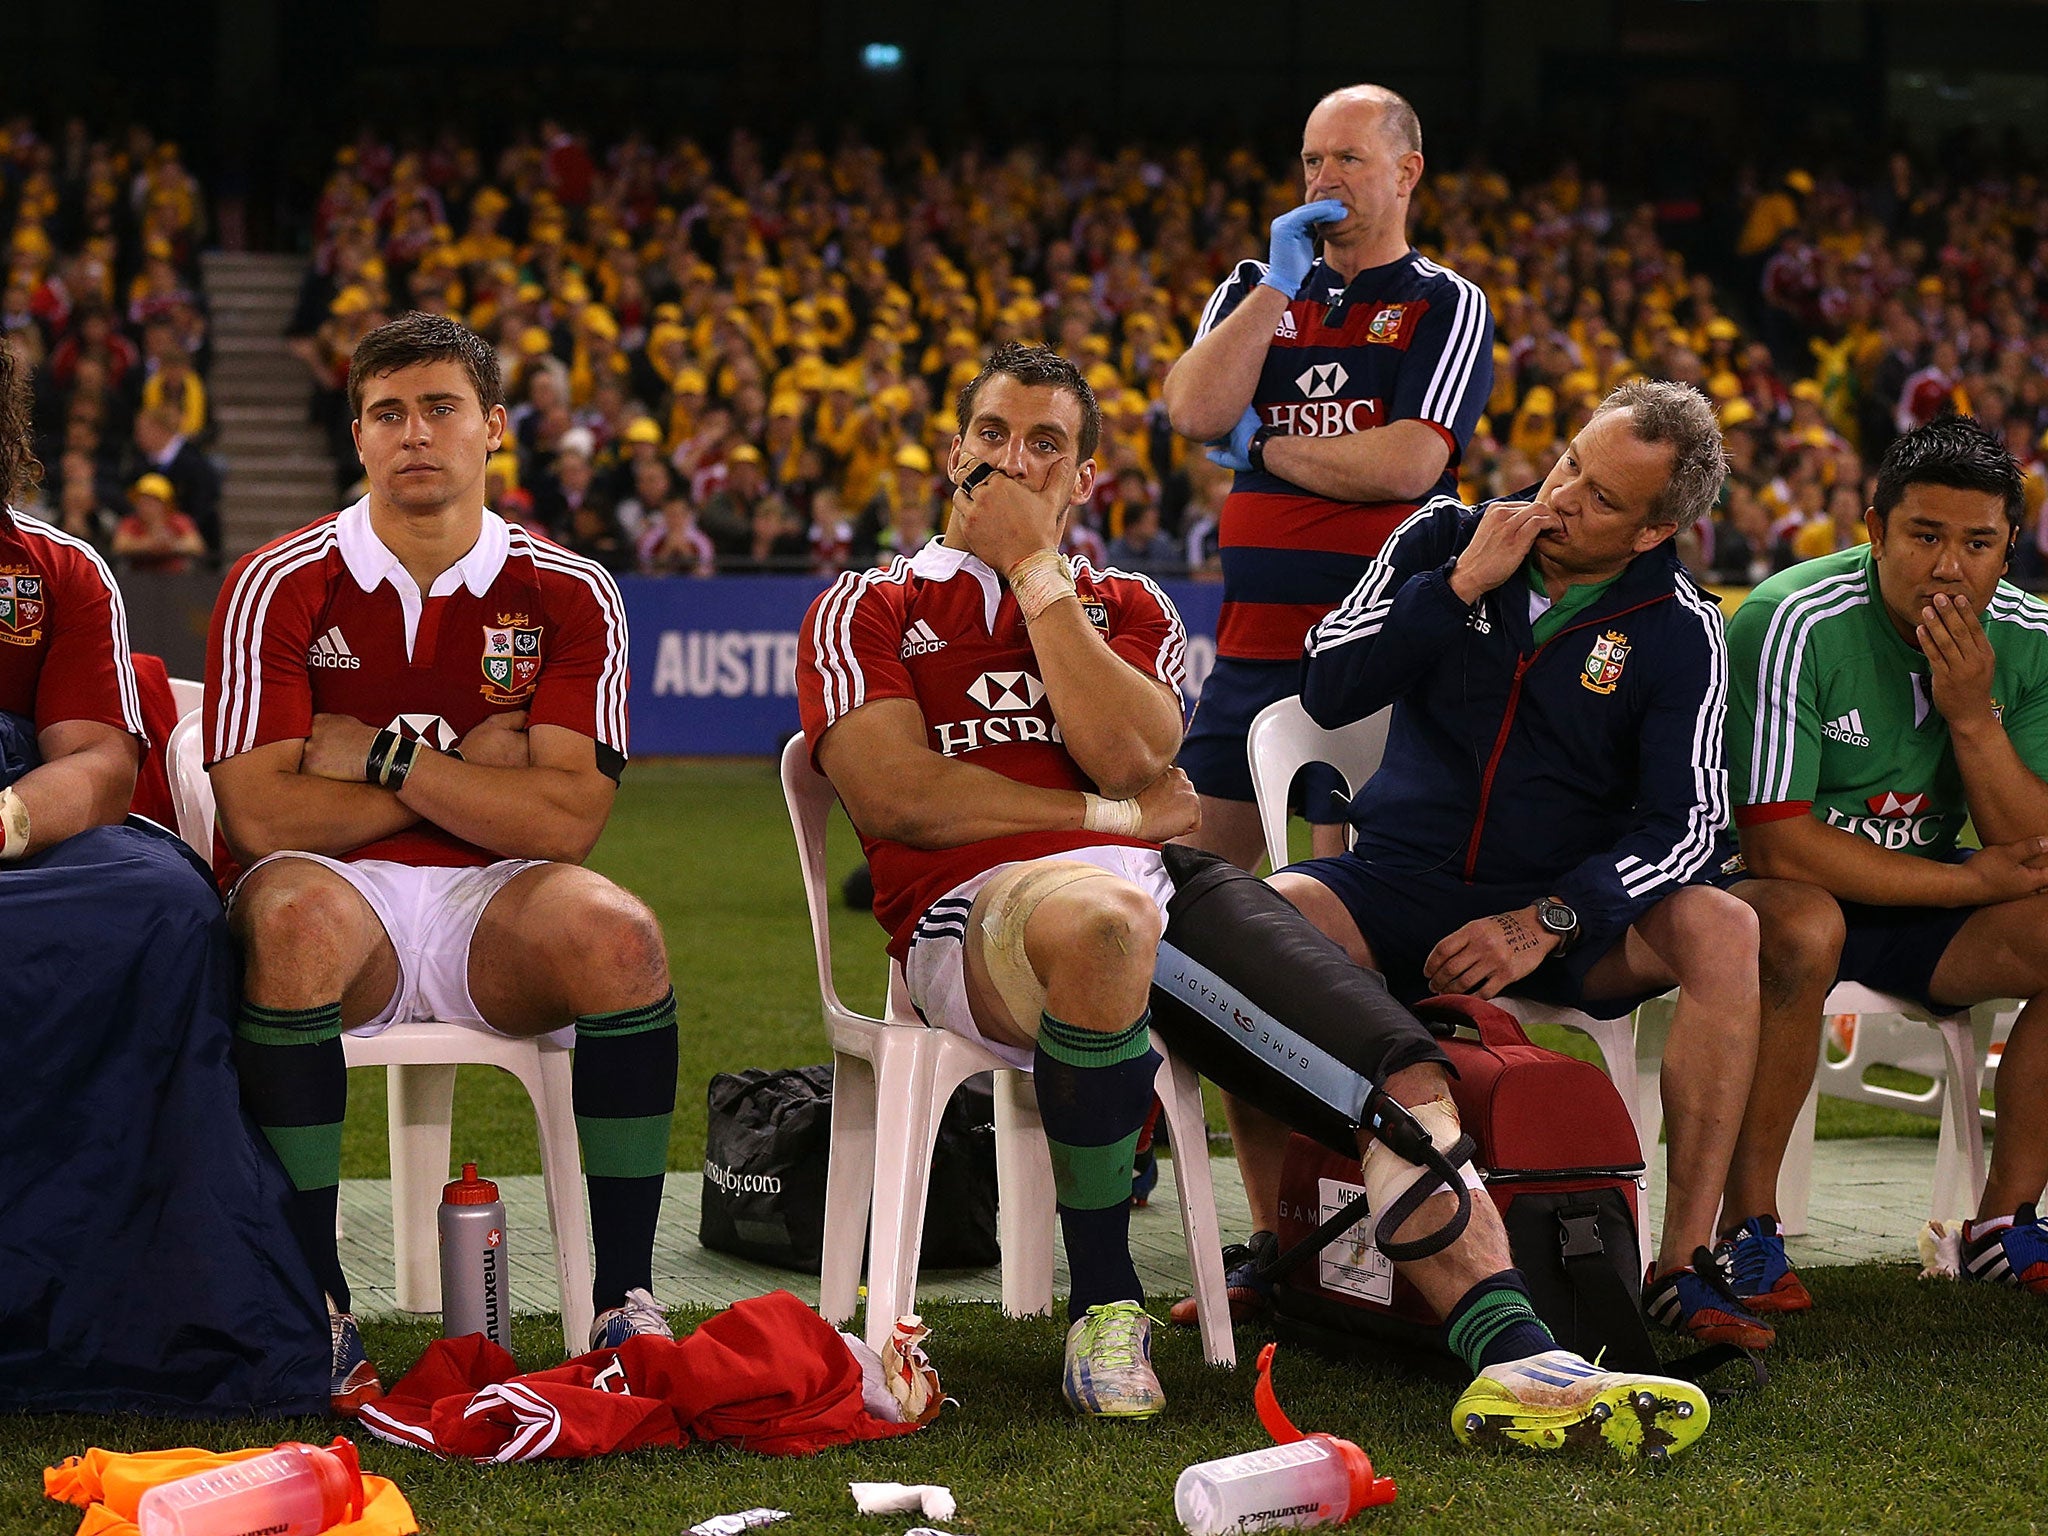 Warburton was angered by the injury that ruled him out of the final Lions Test in 2013